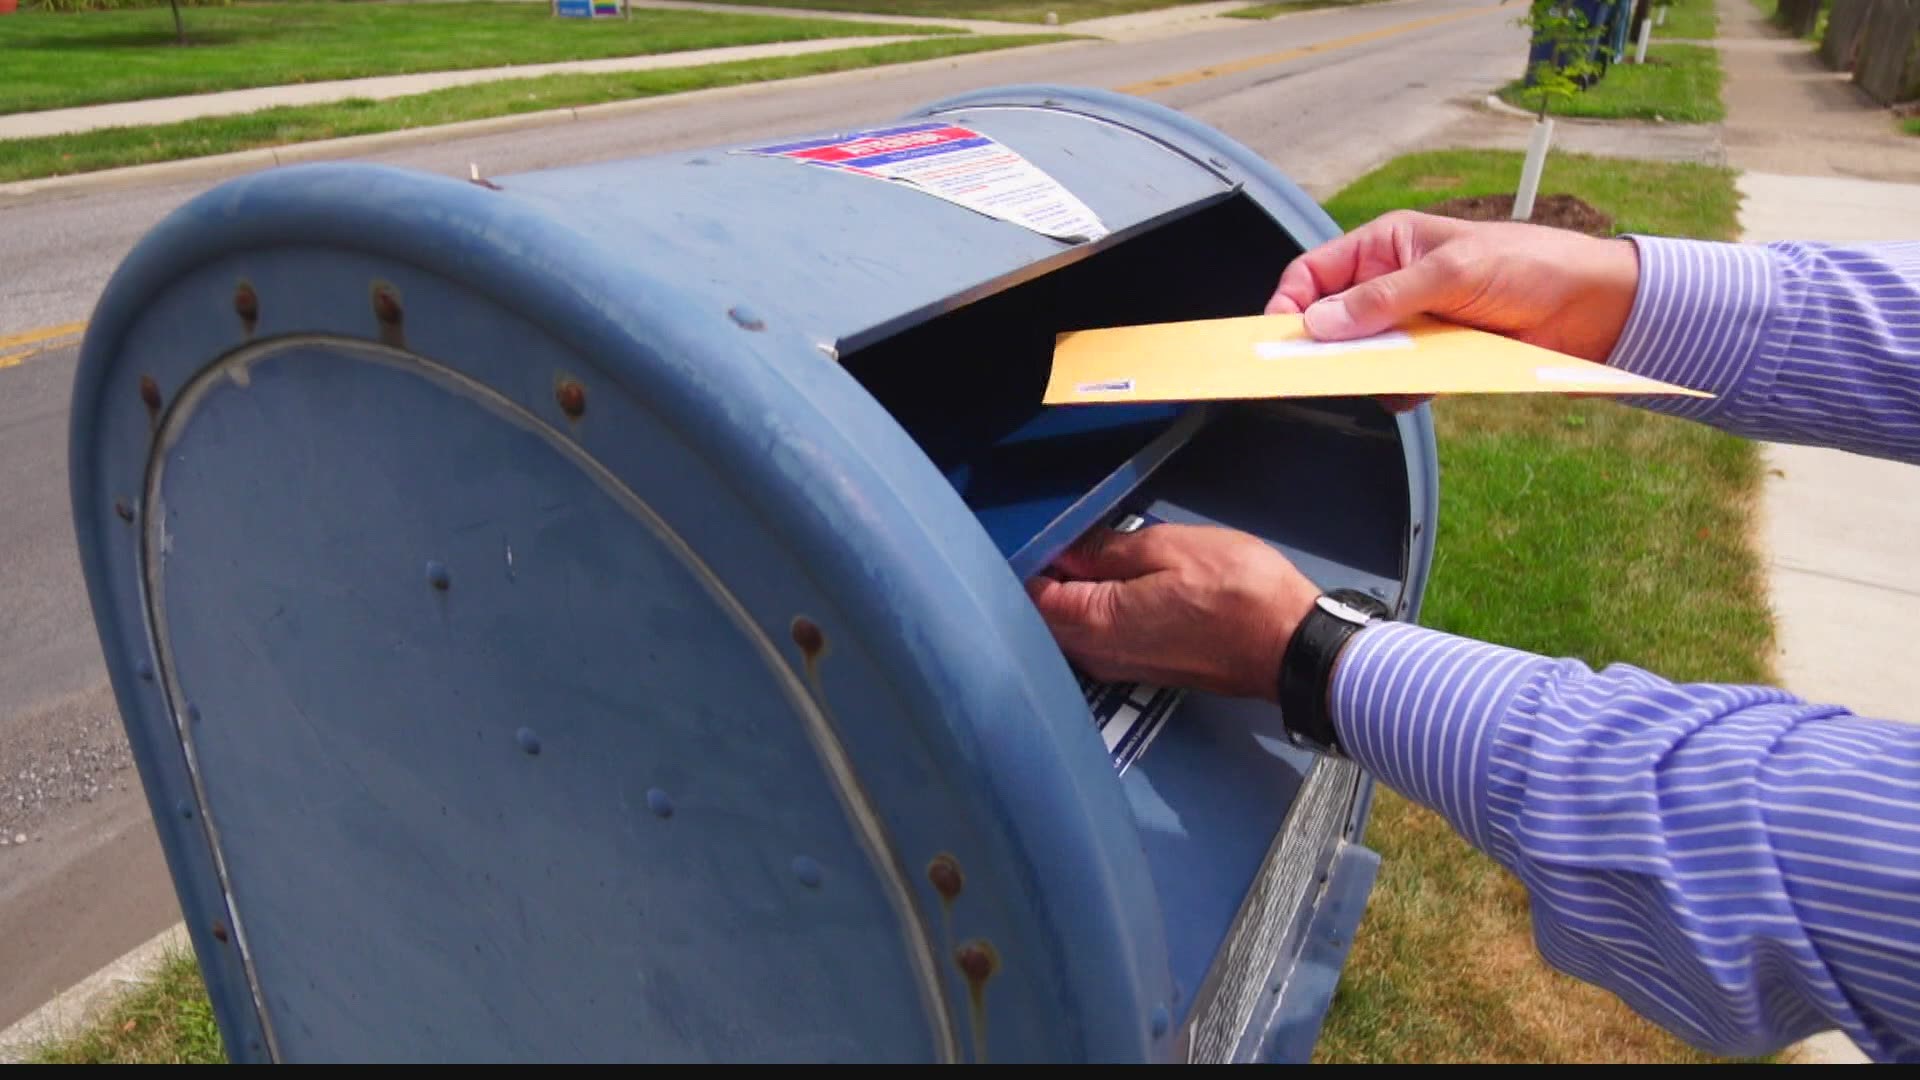 13 Investigates is putting the post office to the test as millions of people are putting pressure on the USPS to cast their ballots this year.